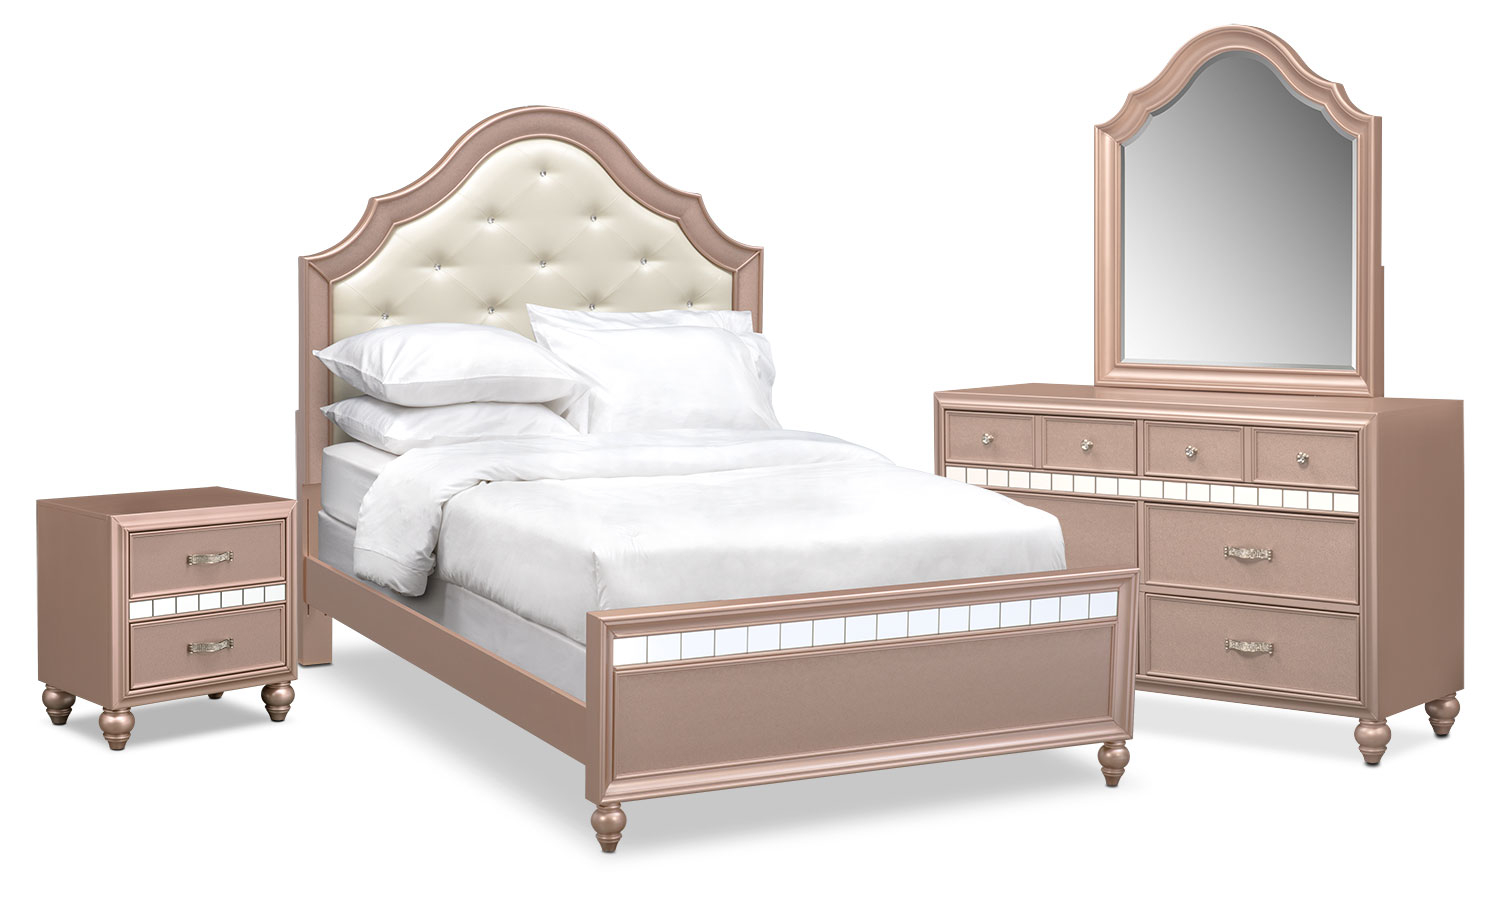 Serena Youth 6 Piece Bedroom Set With Nightstand Dresser And Mirror inside proportions 1500 X 921